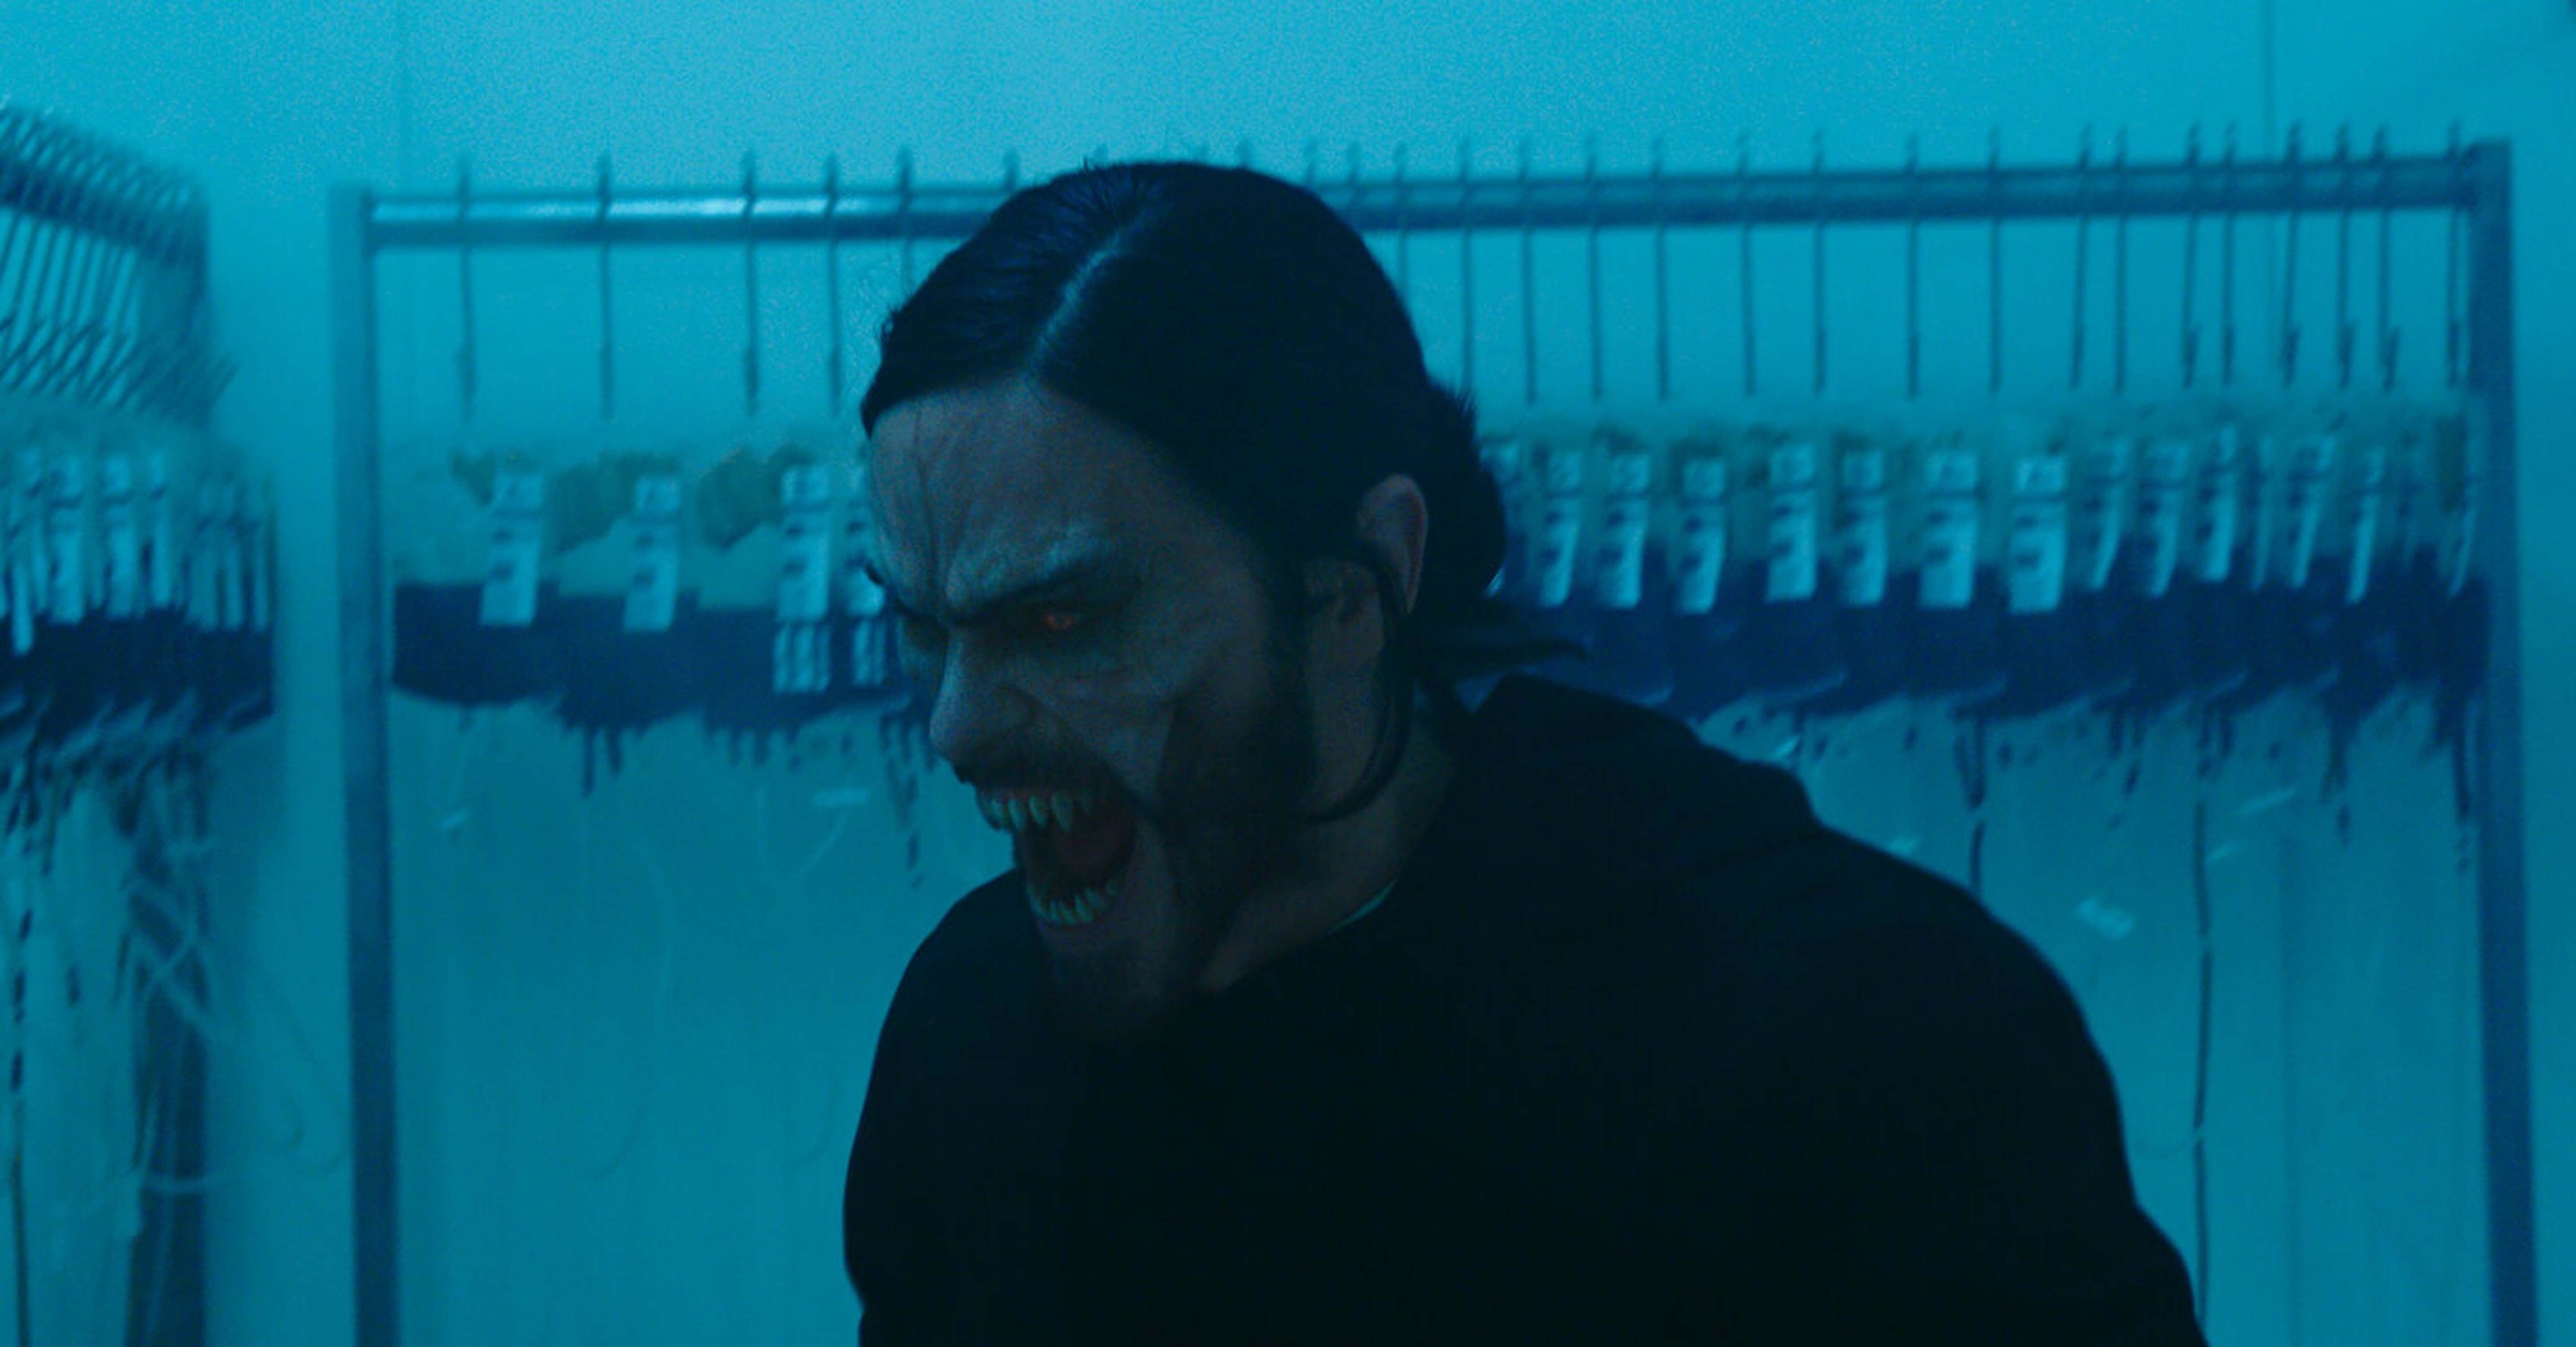 Morbius makes a scary vampire face in a room full of blood bags